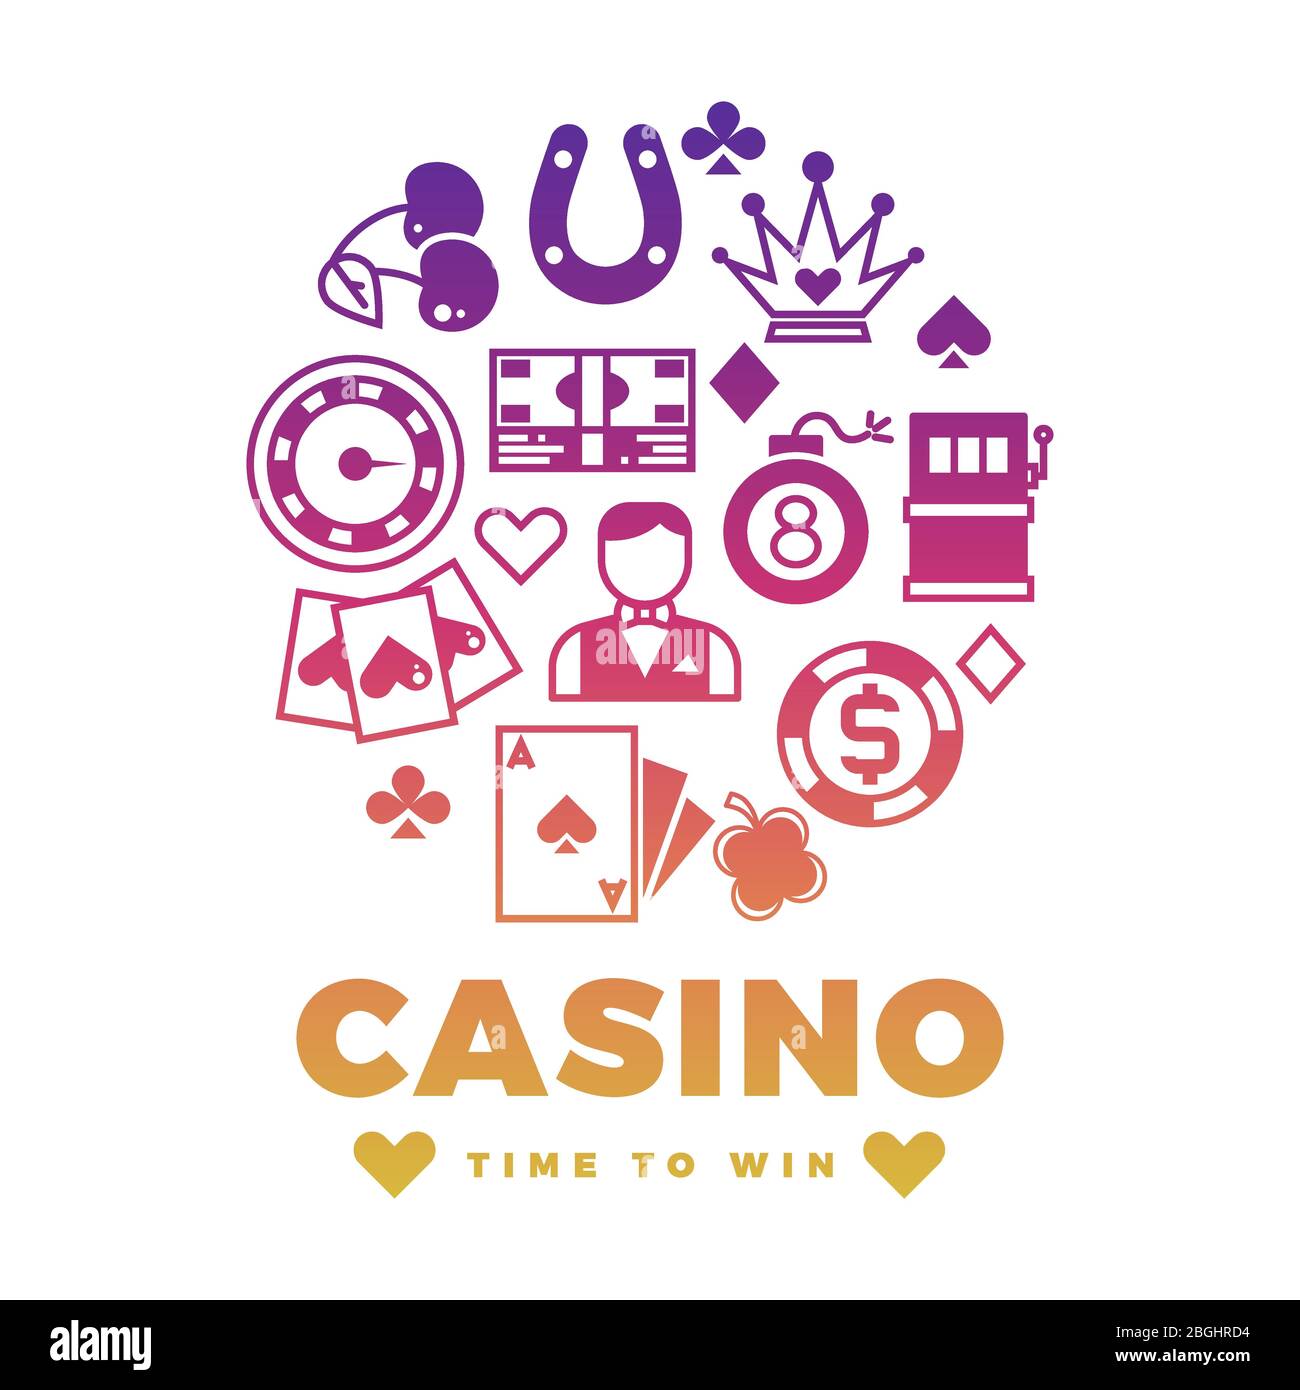 Casino label design with colorful icons round concept. Gambling play, gaming and winning, vector illustration Stock Vector